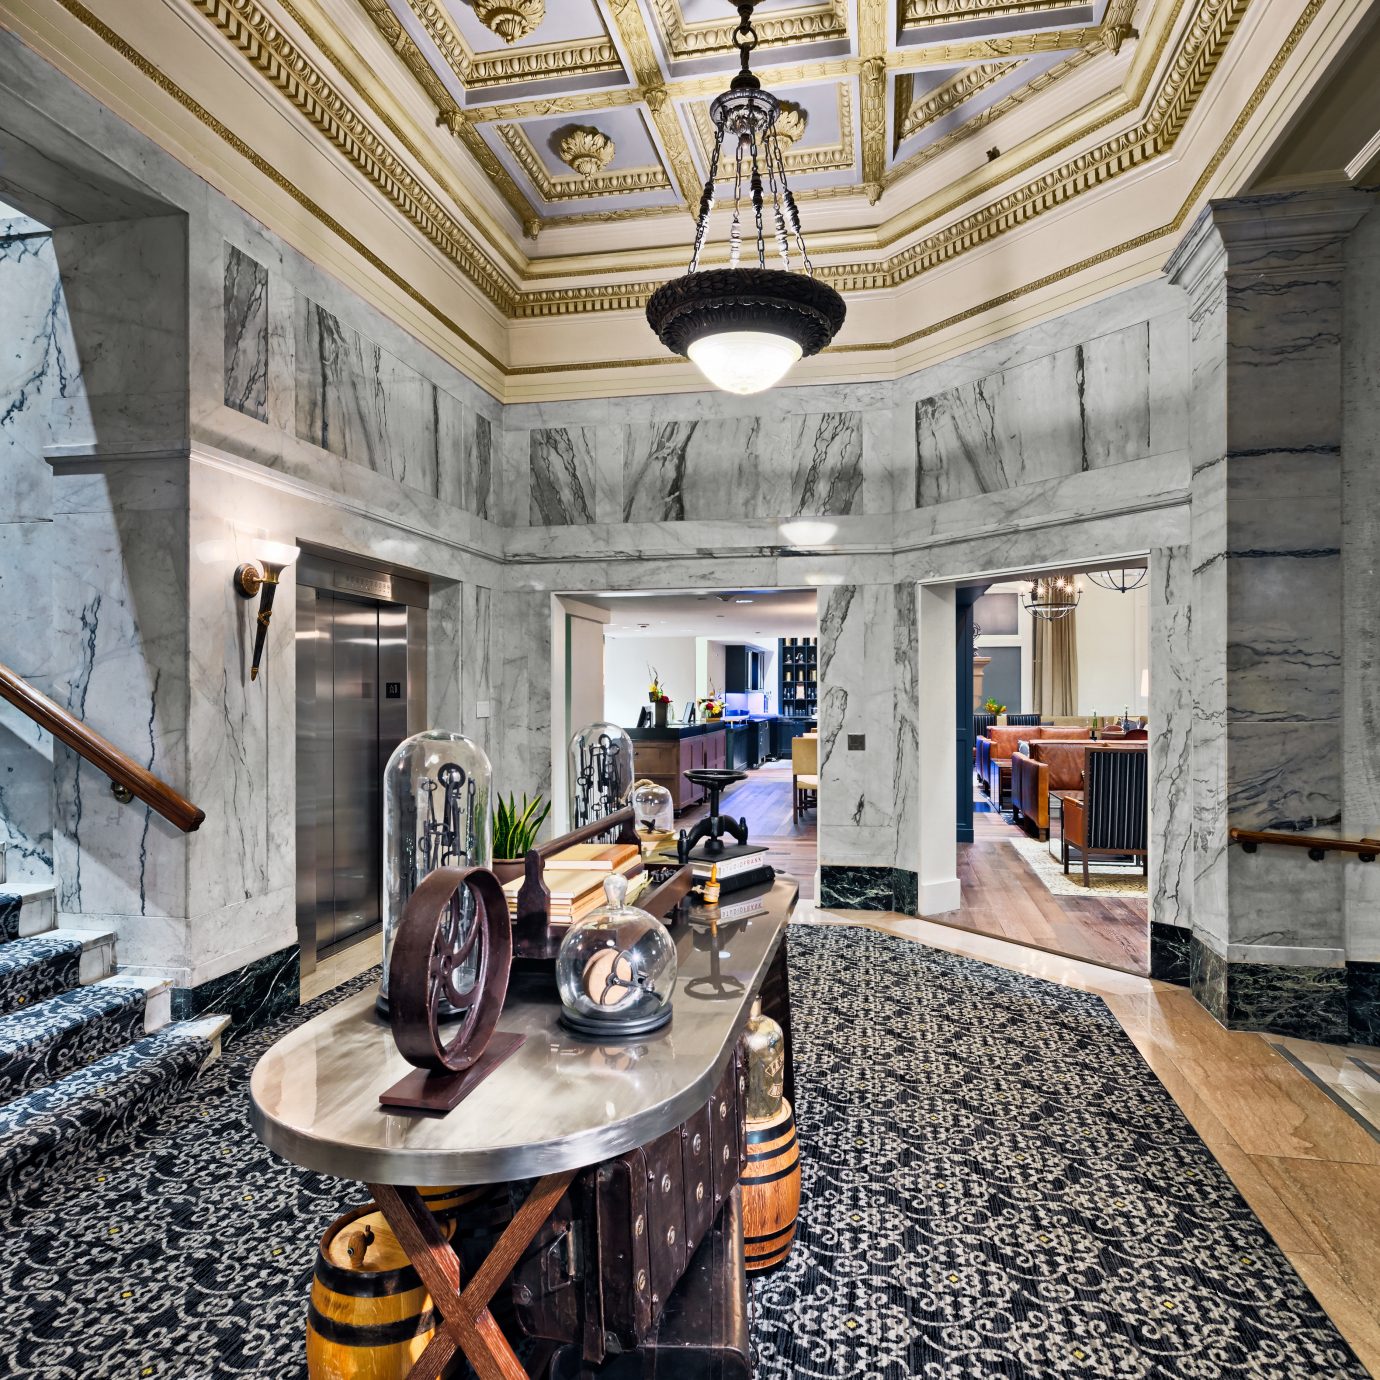 Architecture Historic Lobby Modern flooring home mansion tourist attraction stone